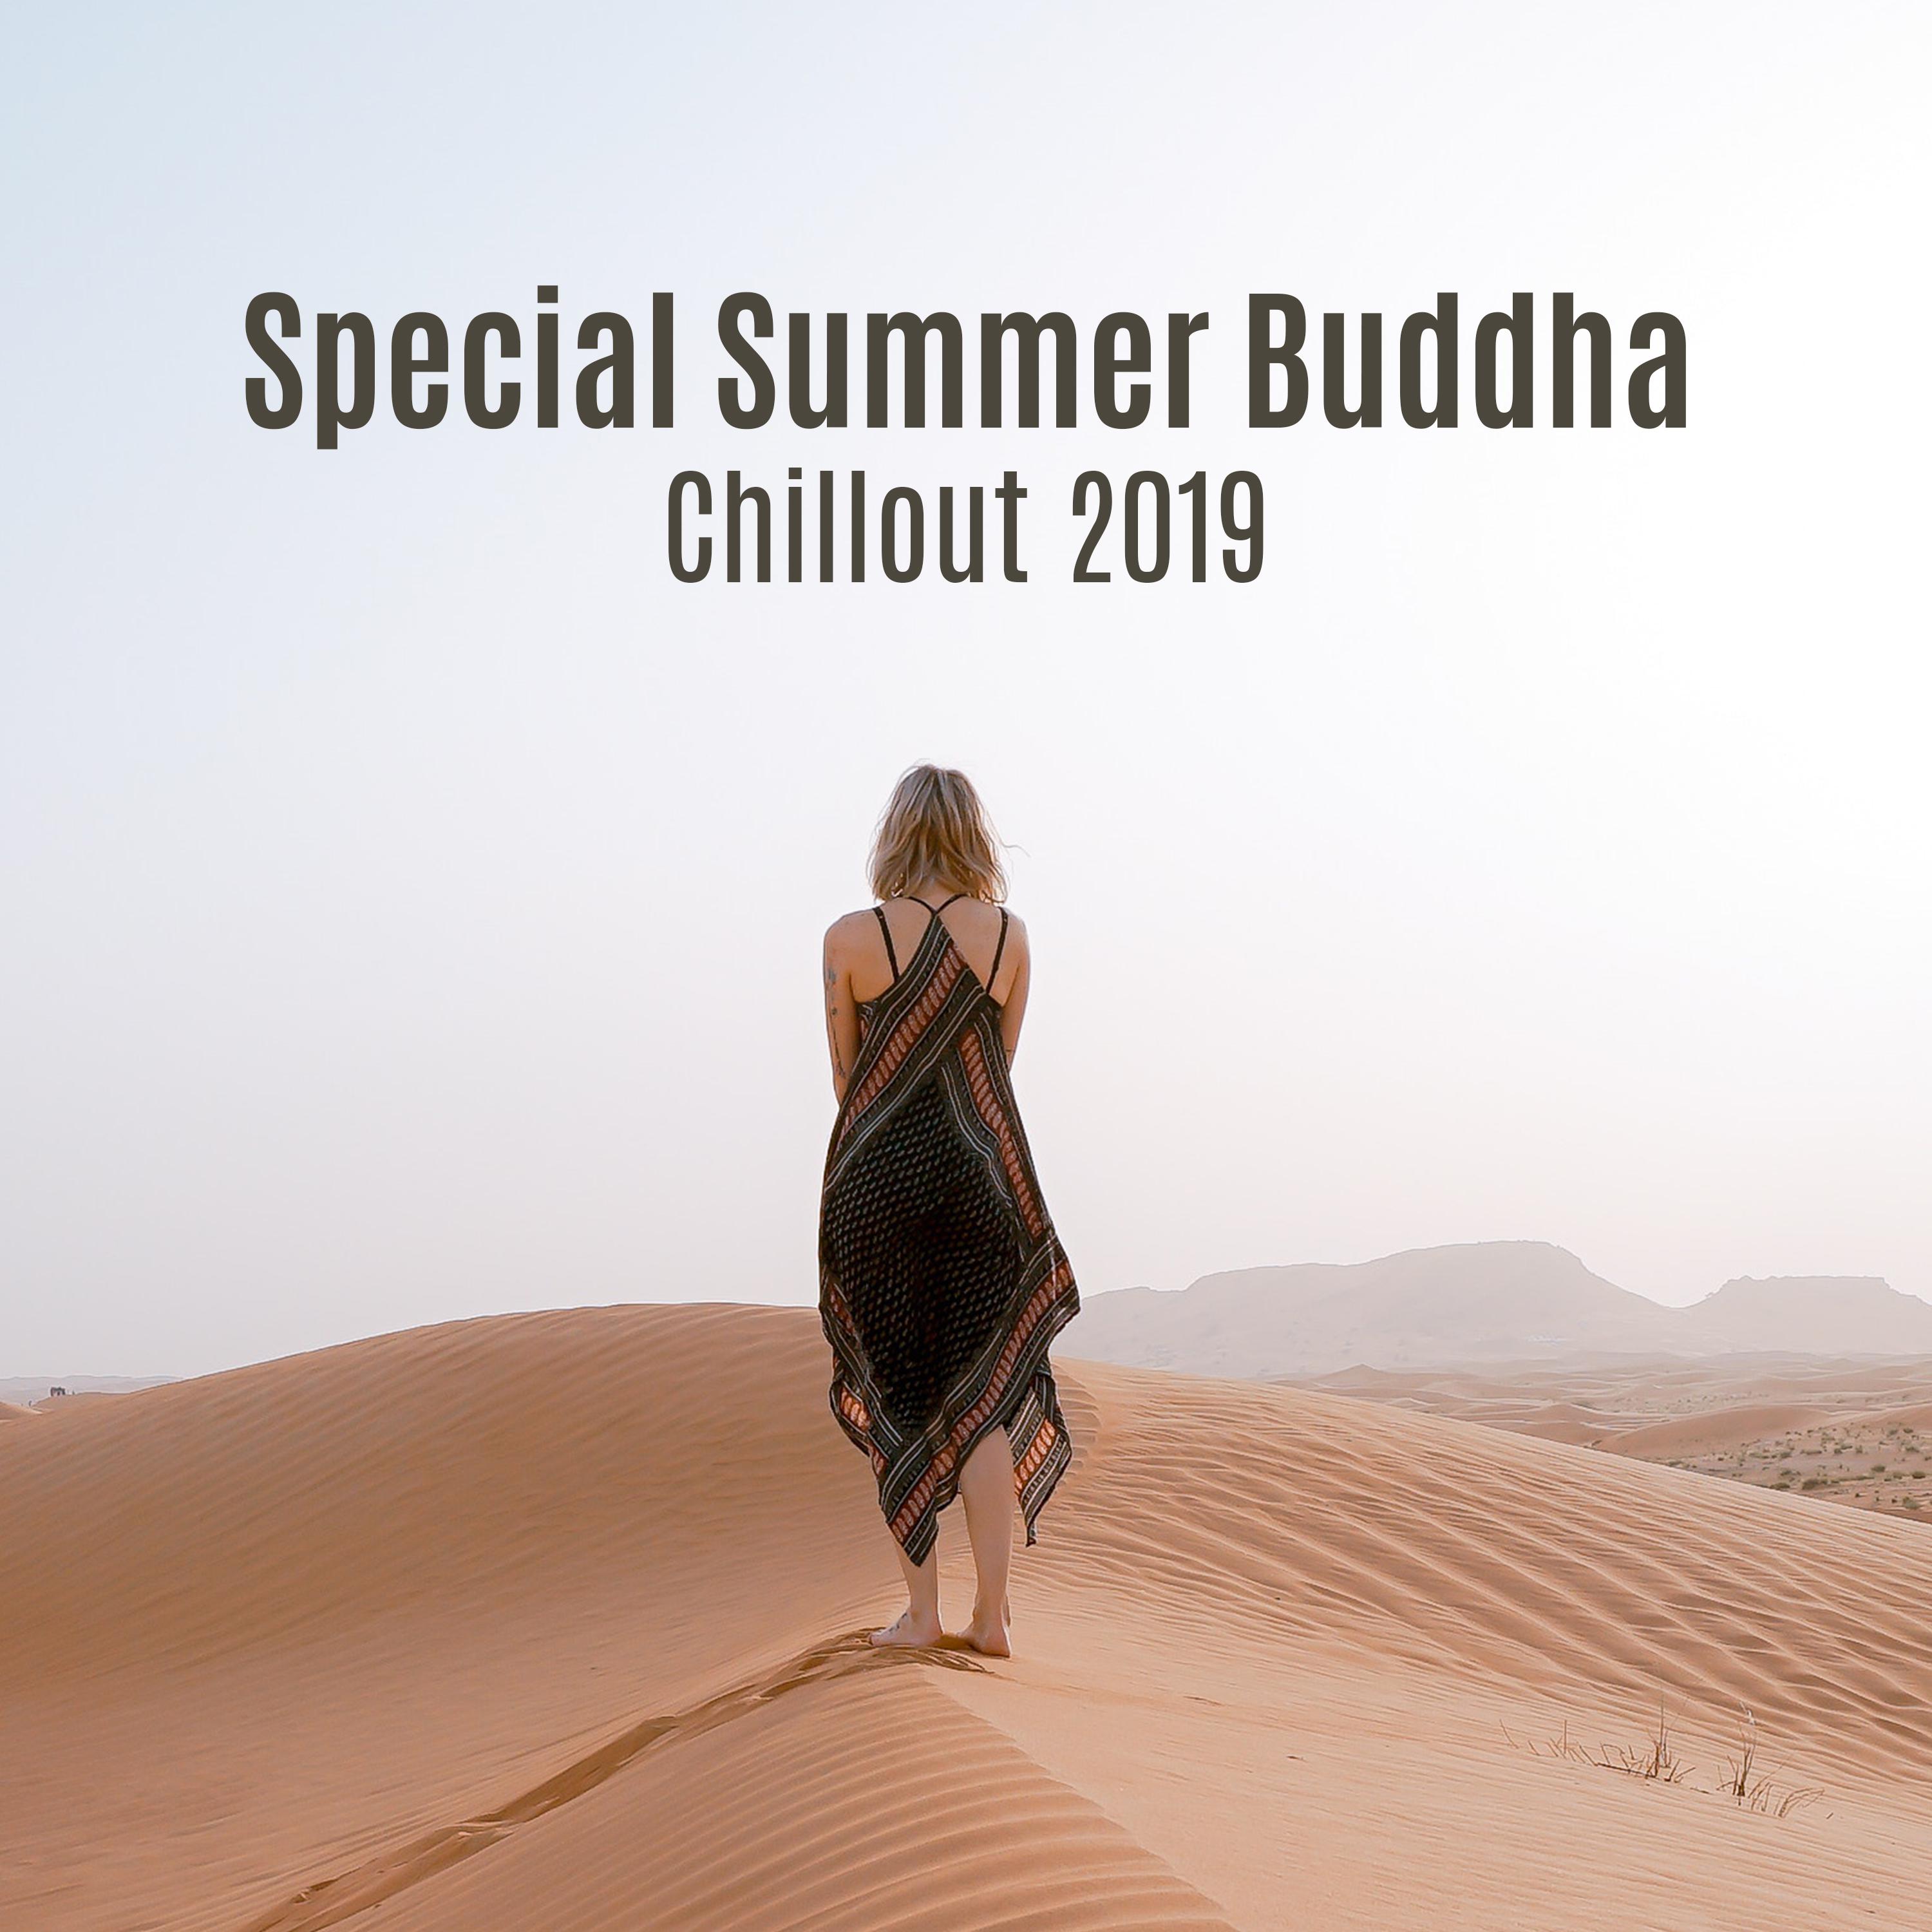 Special Summer Buddha Chillout 2019